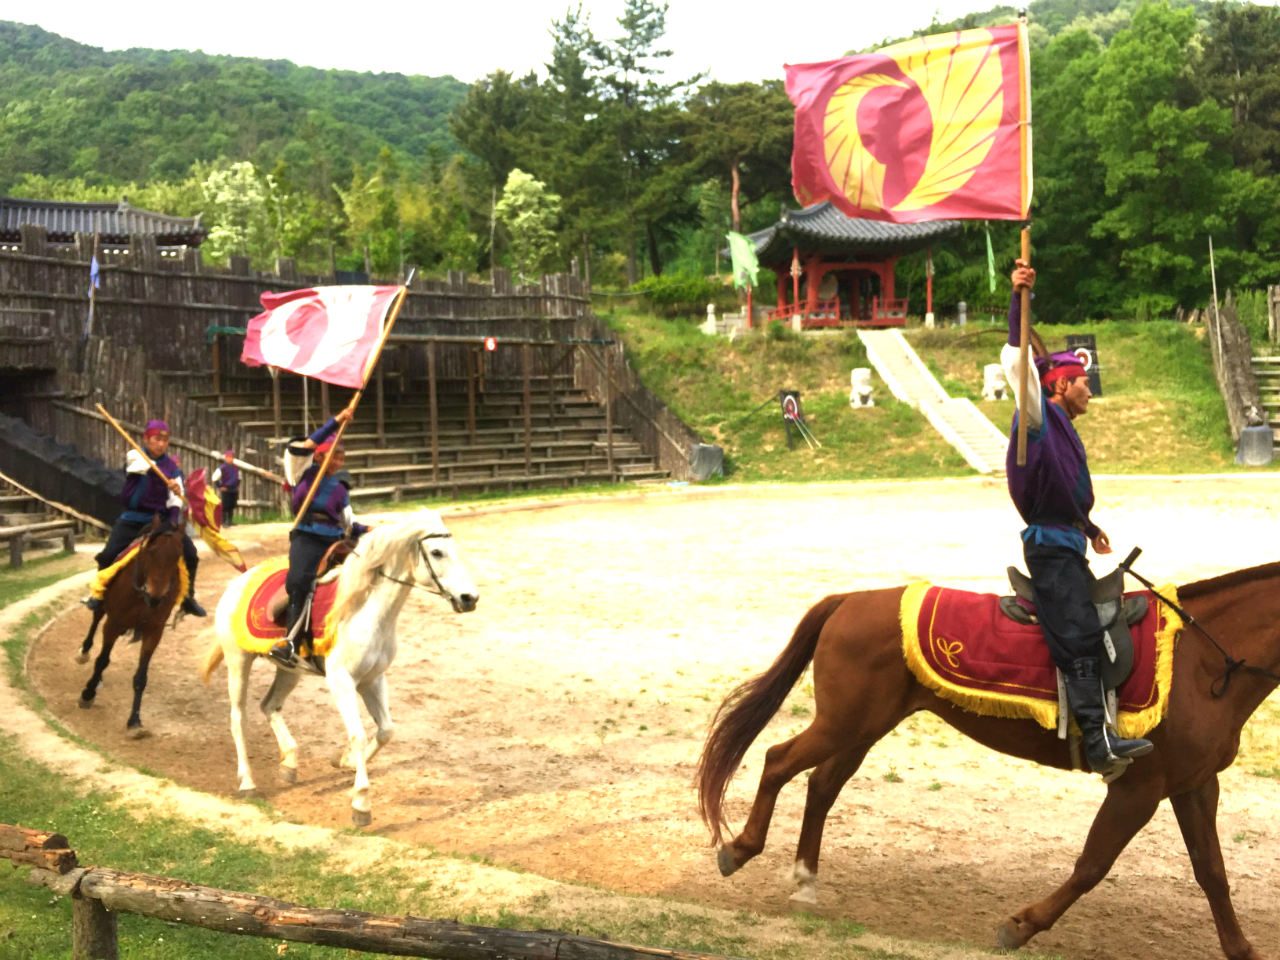 FLOWERING KNIGHTS. The Hwarang show is one of the main attractions of the park. Watch these talented performers do tricks while on horseback! 